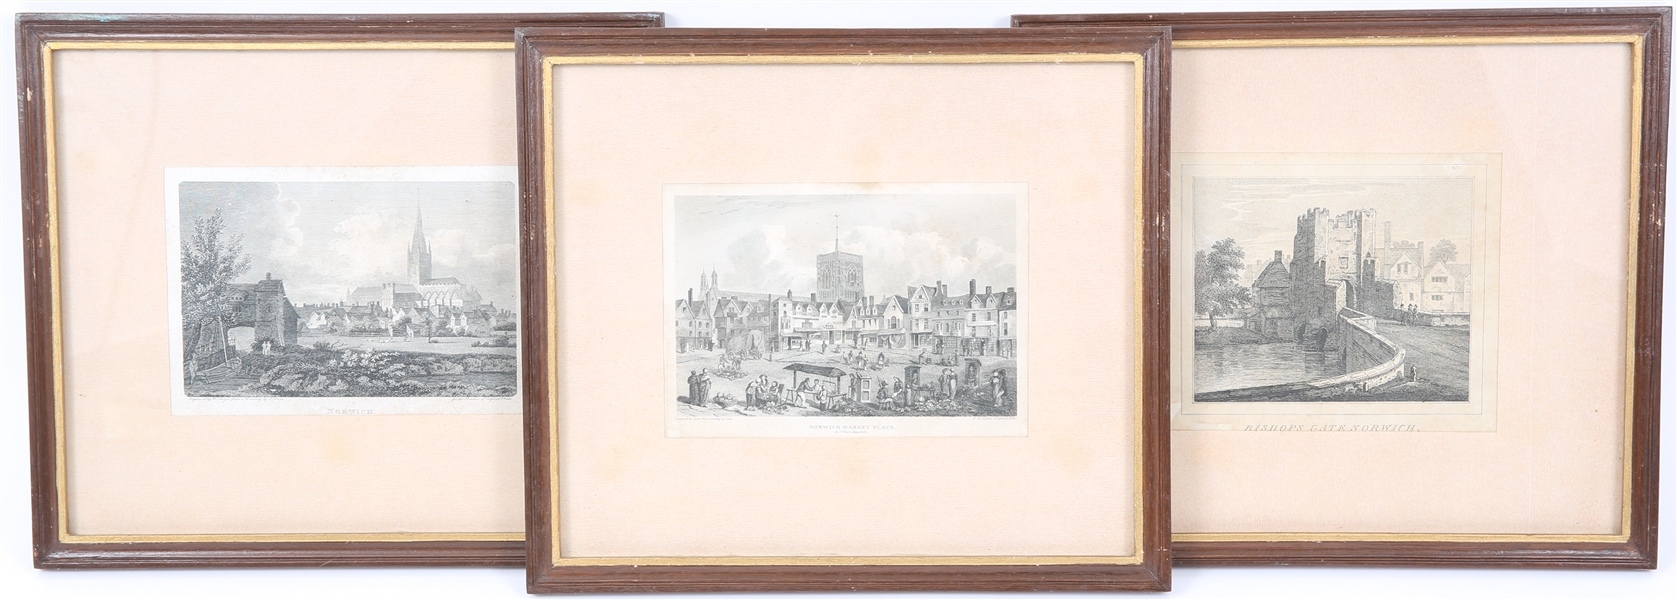 18TH C. ENGRAVINGS / ETCHINGS  OF NORWICH, ENGLAND